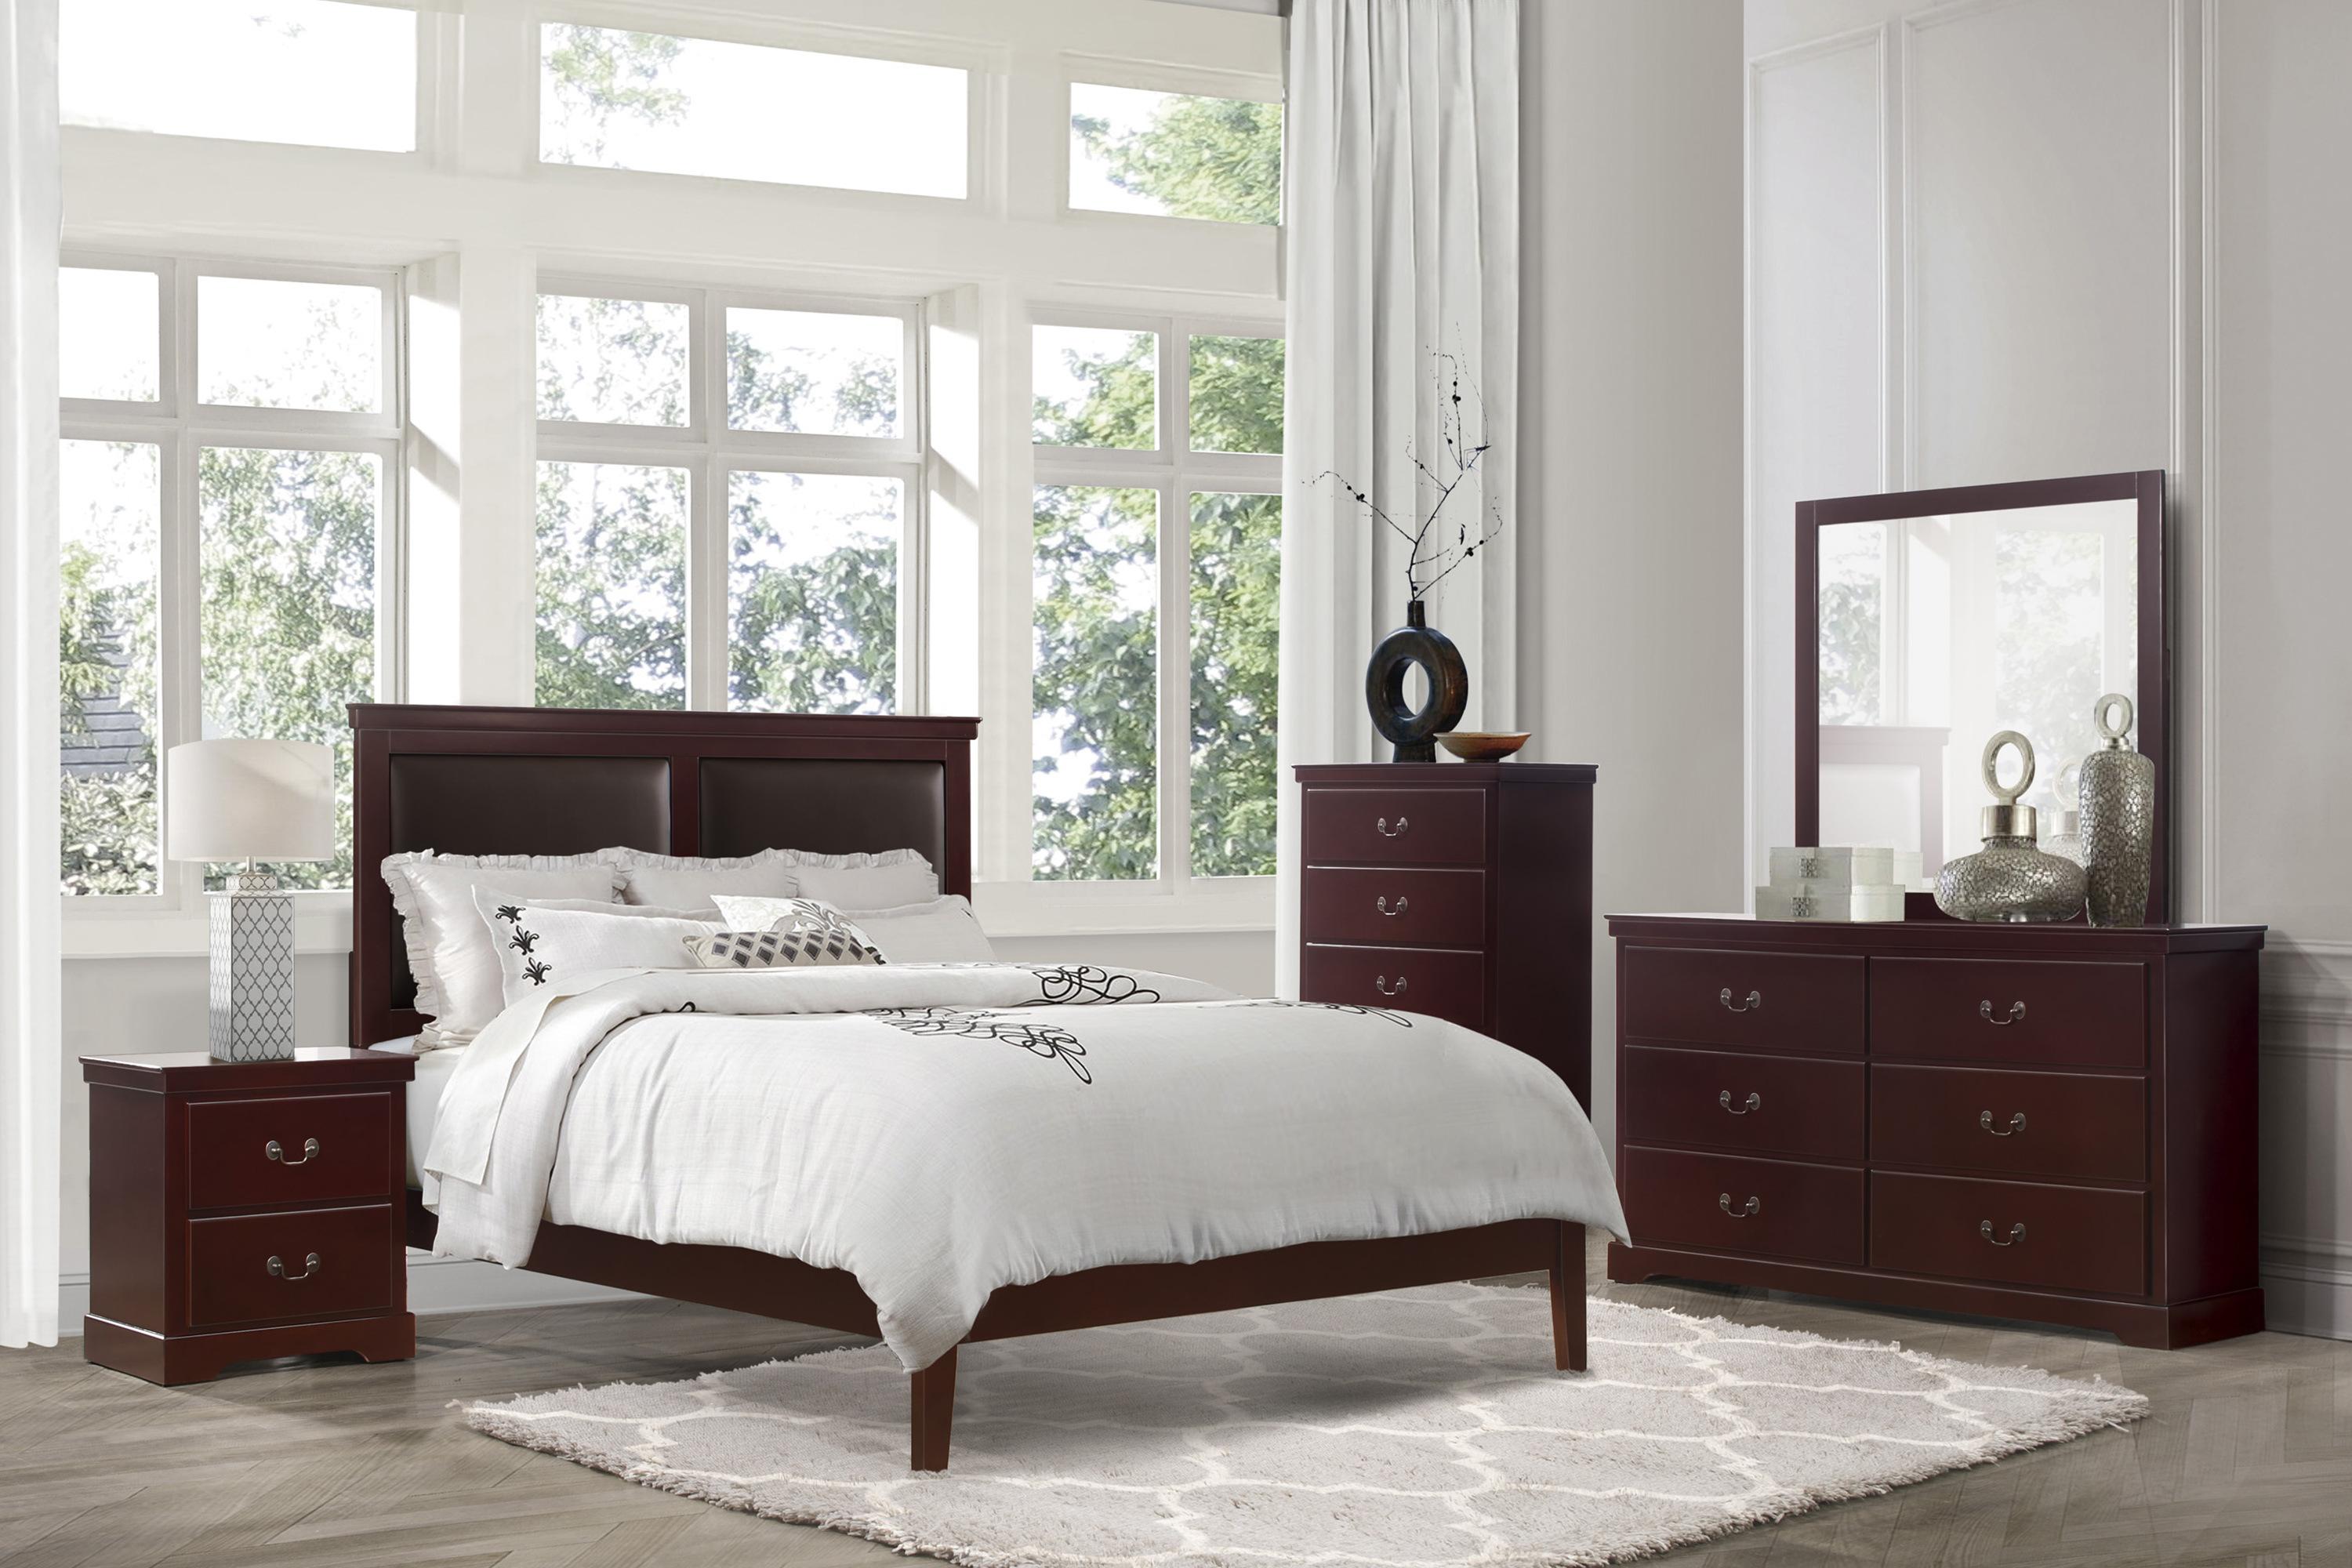 Modern Bedroom Set 1519CHF-1-5PC Seabright 1519CHF-1-5PC in Cherry Faux Leather